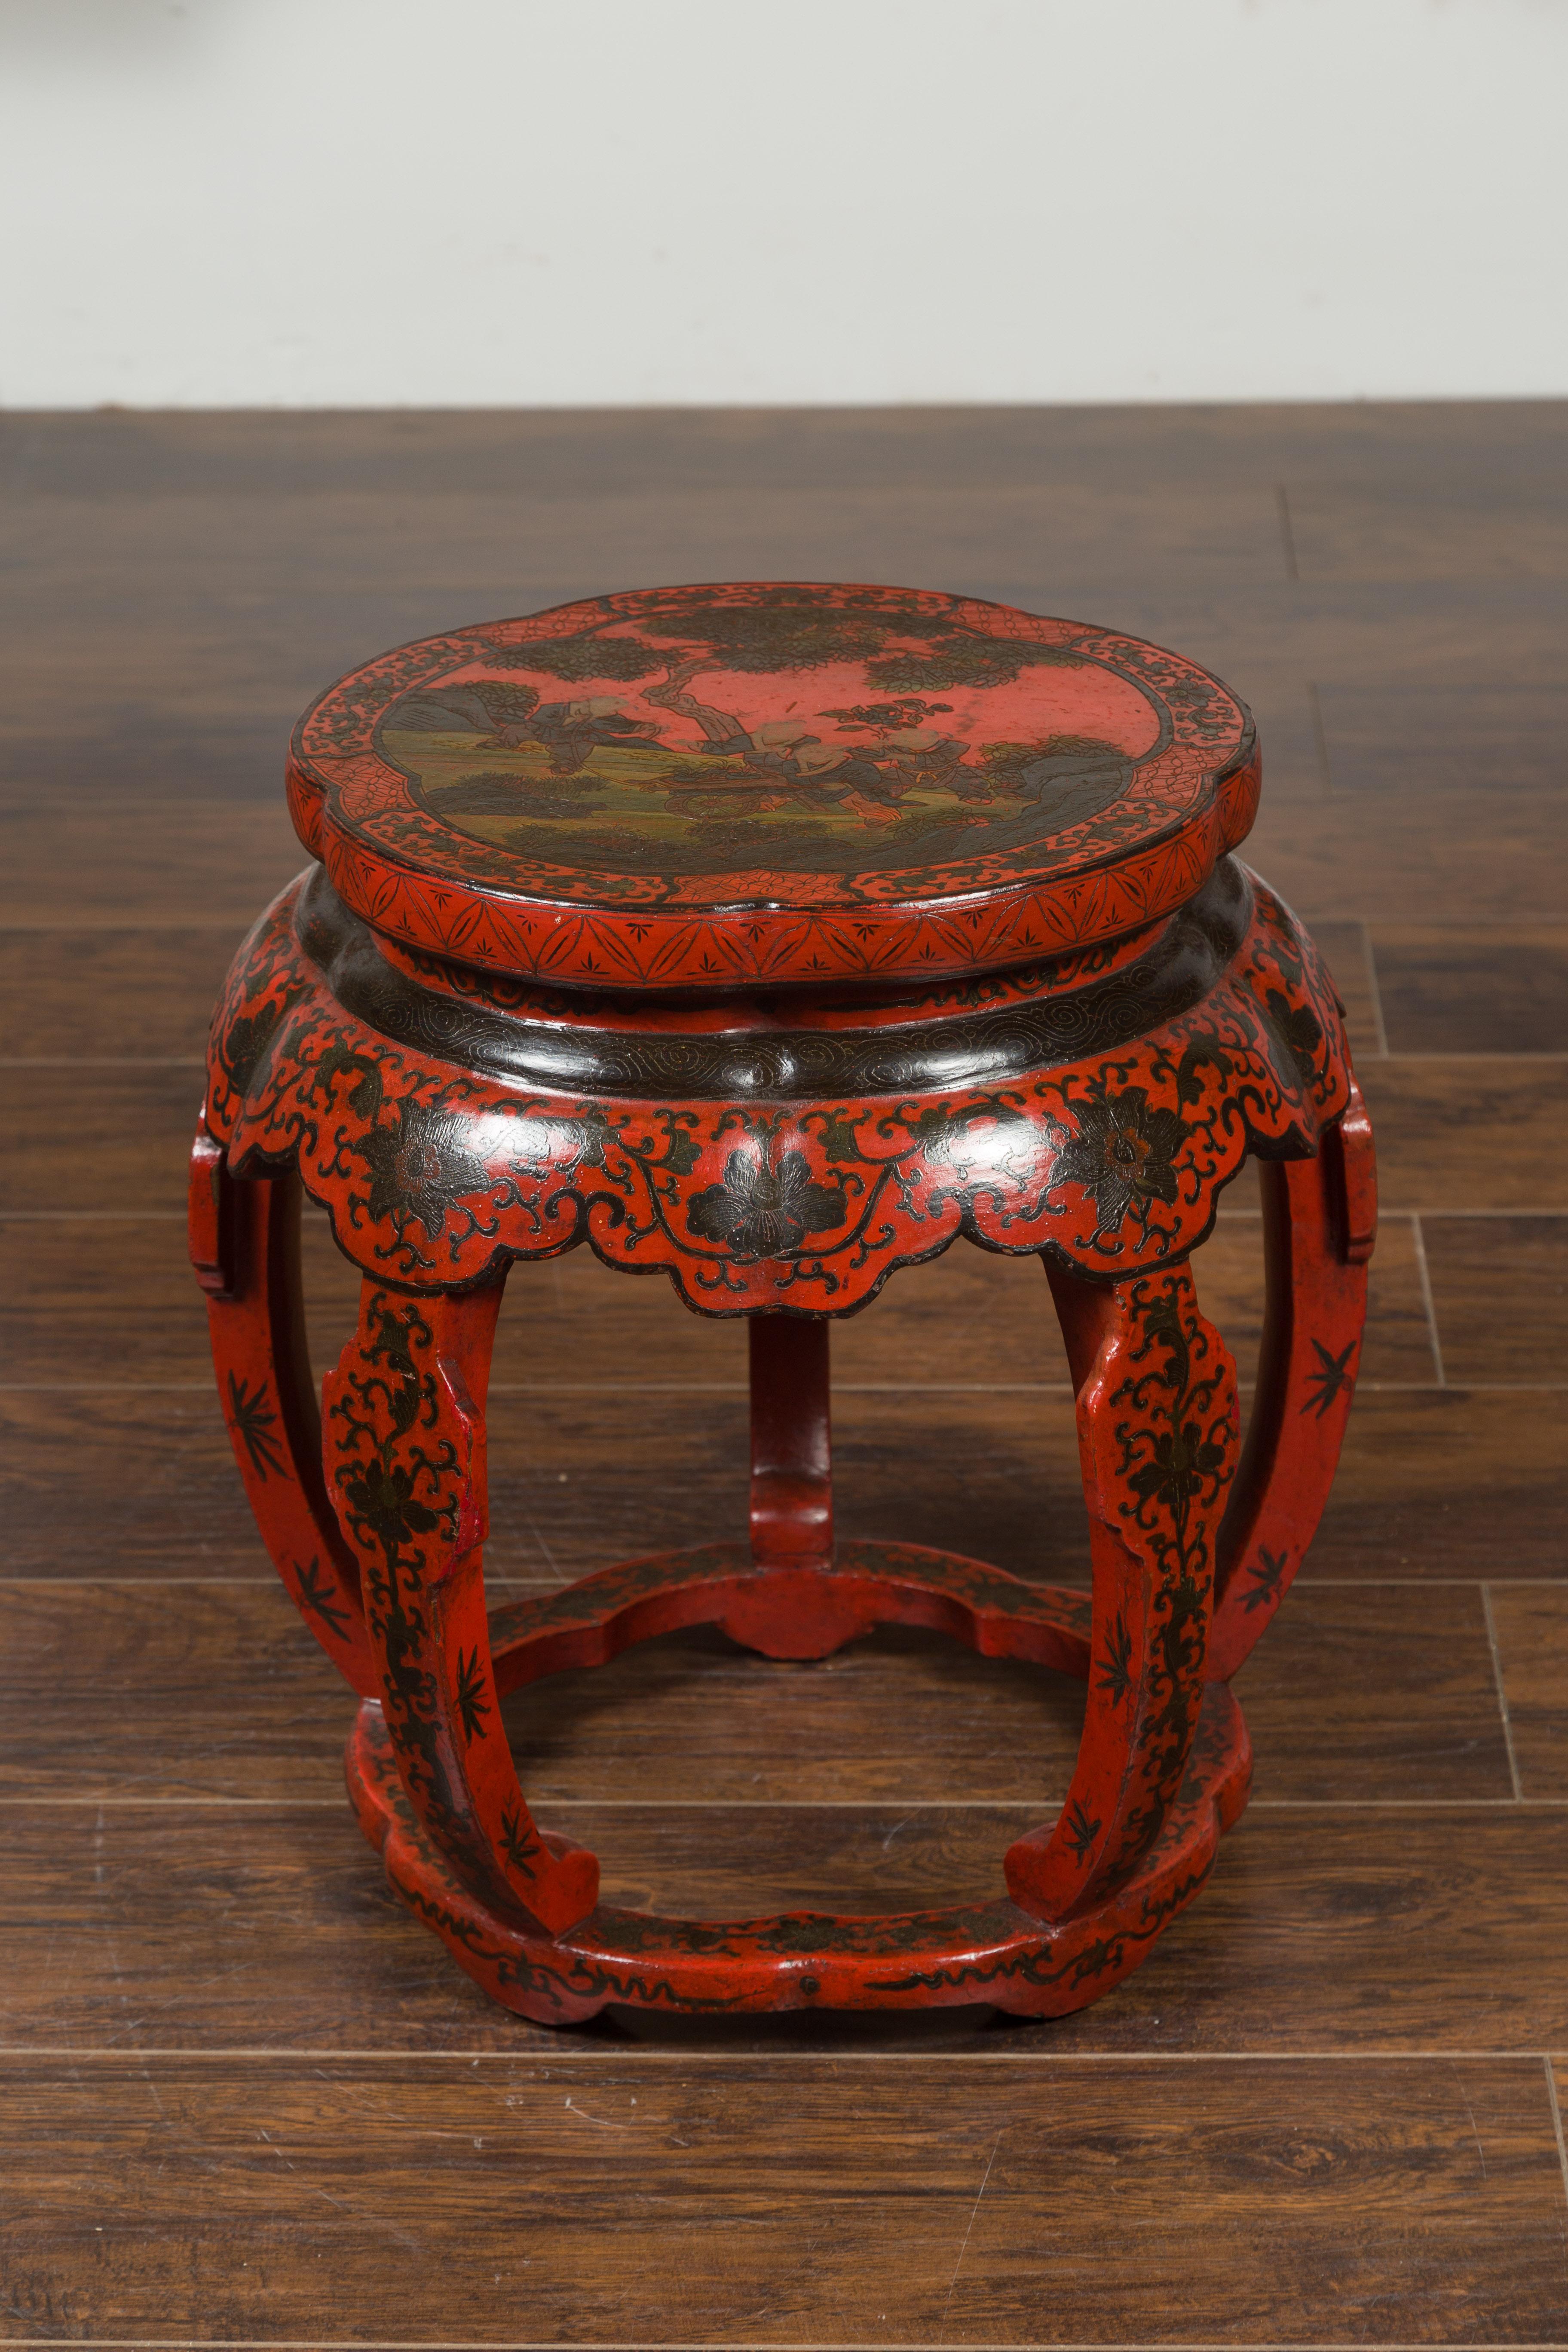 A Chinese Ming Dynasty style red and black lacquered drum stool from the early 20th century, with chinoiserie decor. Created in China during the first quarter of the 20th century, this Ming style drum stool will make for an excellent drinks table or